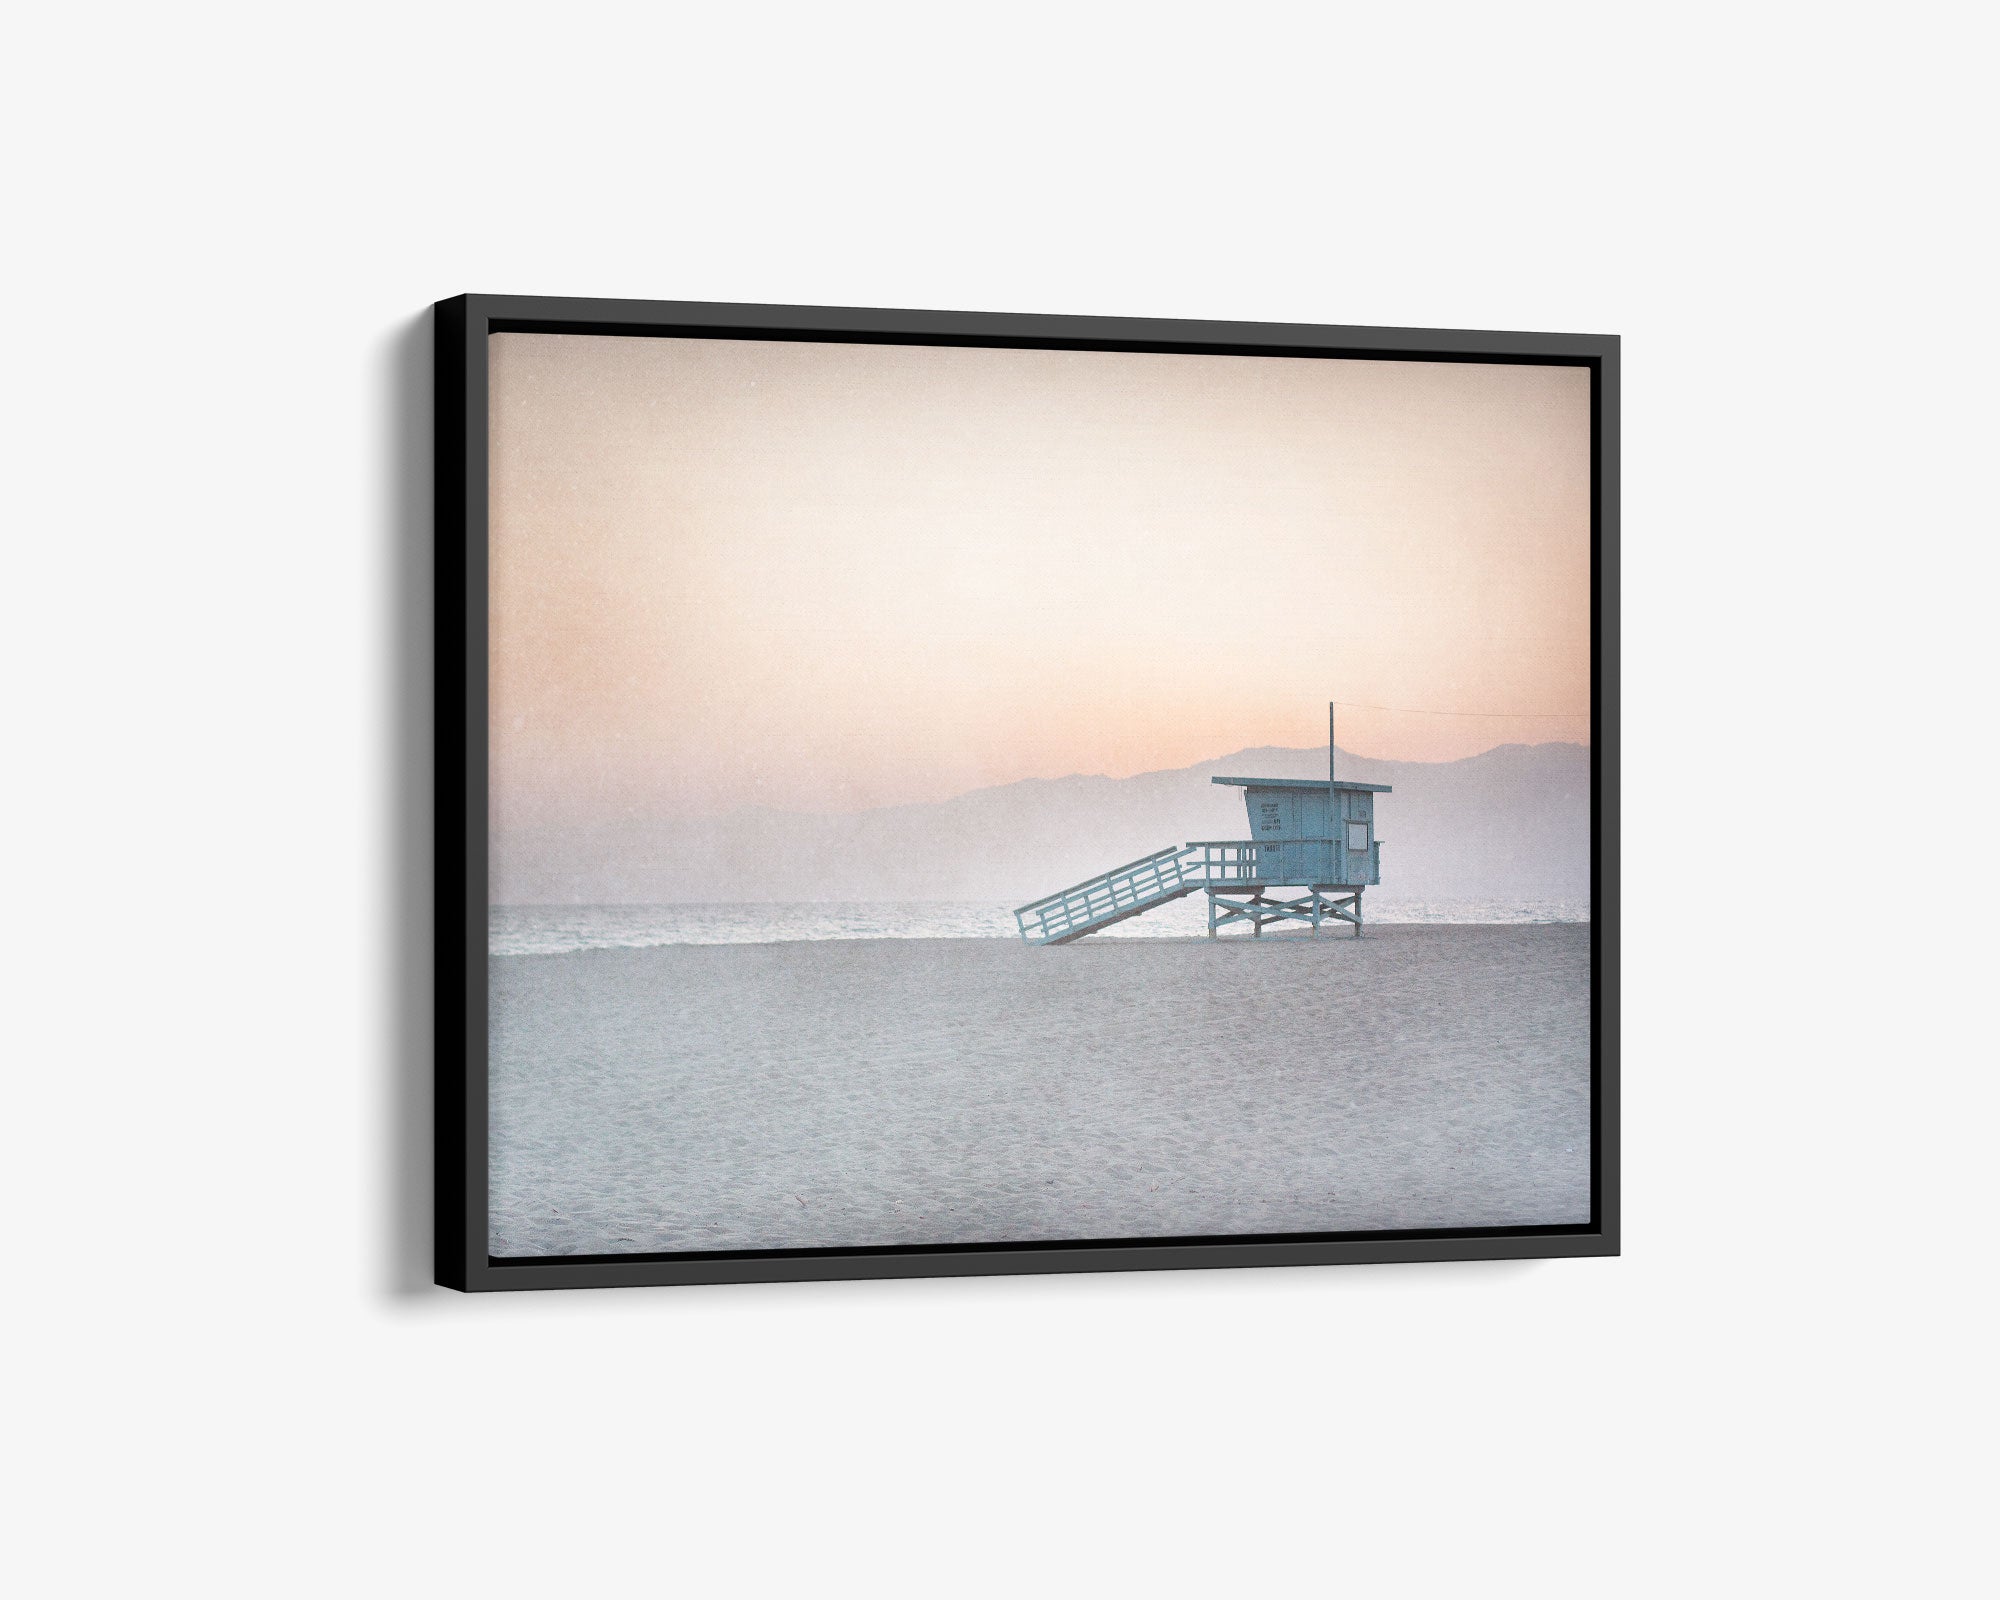 A framed sunset photograph depicting a lifeguard tower on serene Venice Santa Monica beach, with gentle hues of pink and blue in the sky and a faint mountain silhouette in the background - Offley Green&#39;s Pink Coastal Wall Art, &#39;Lifeguard Tower&#39;.